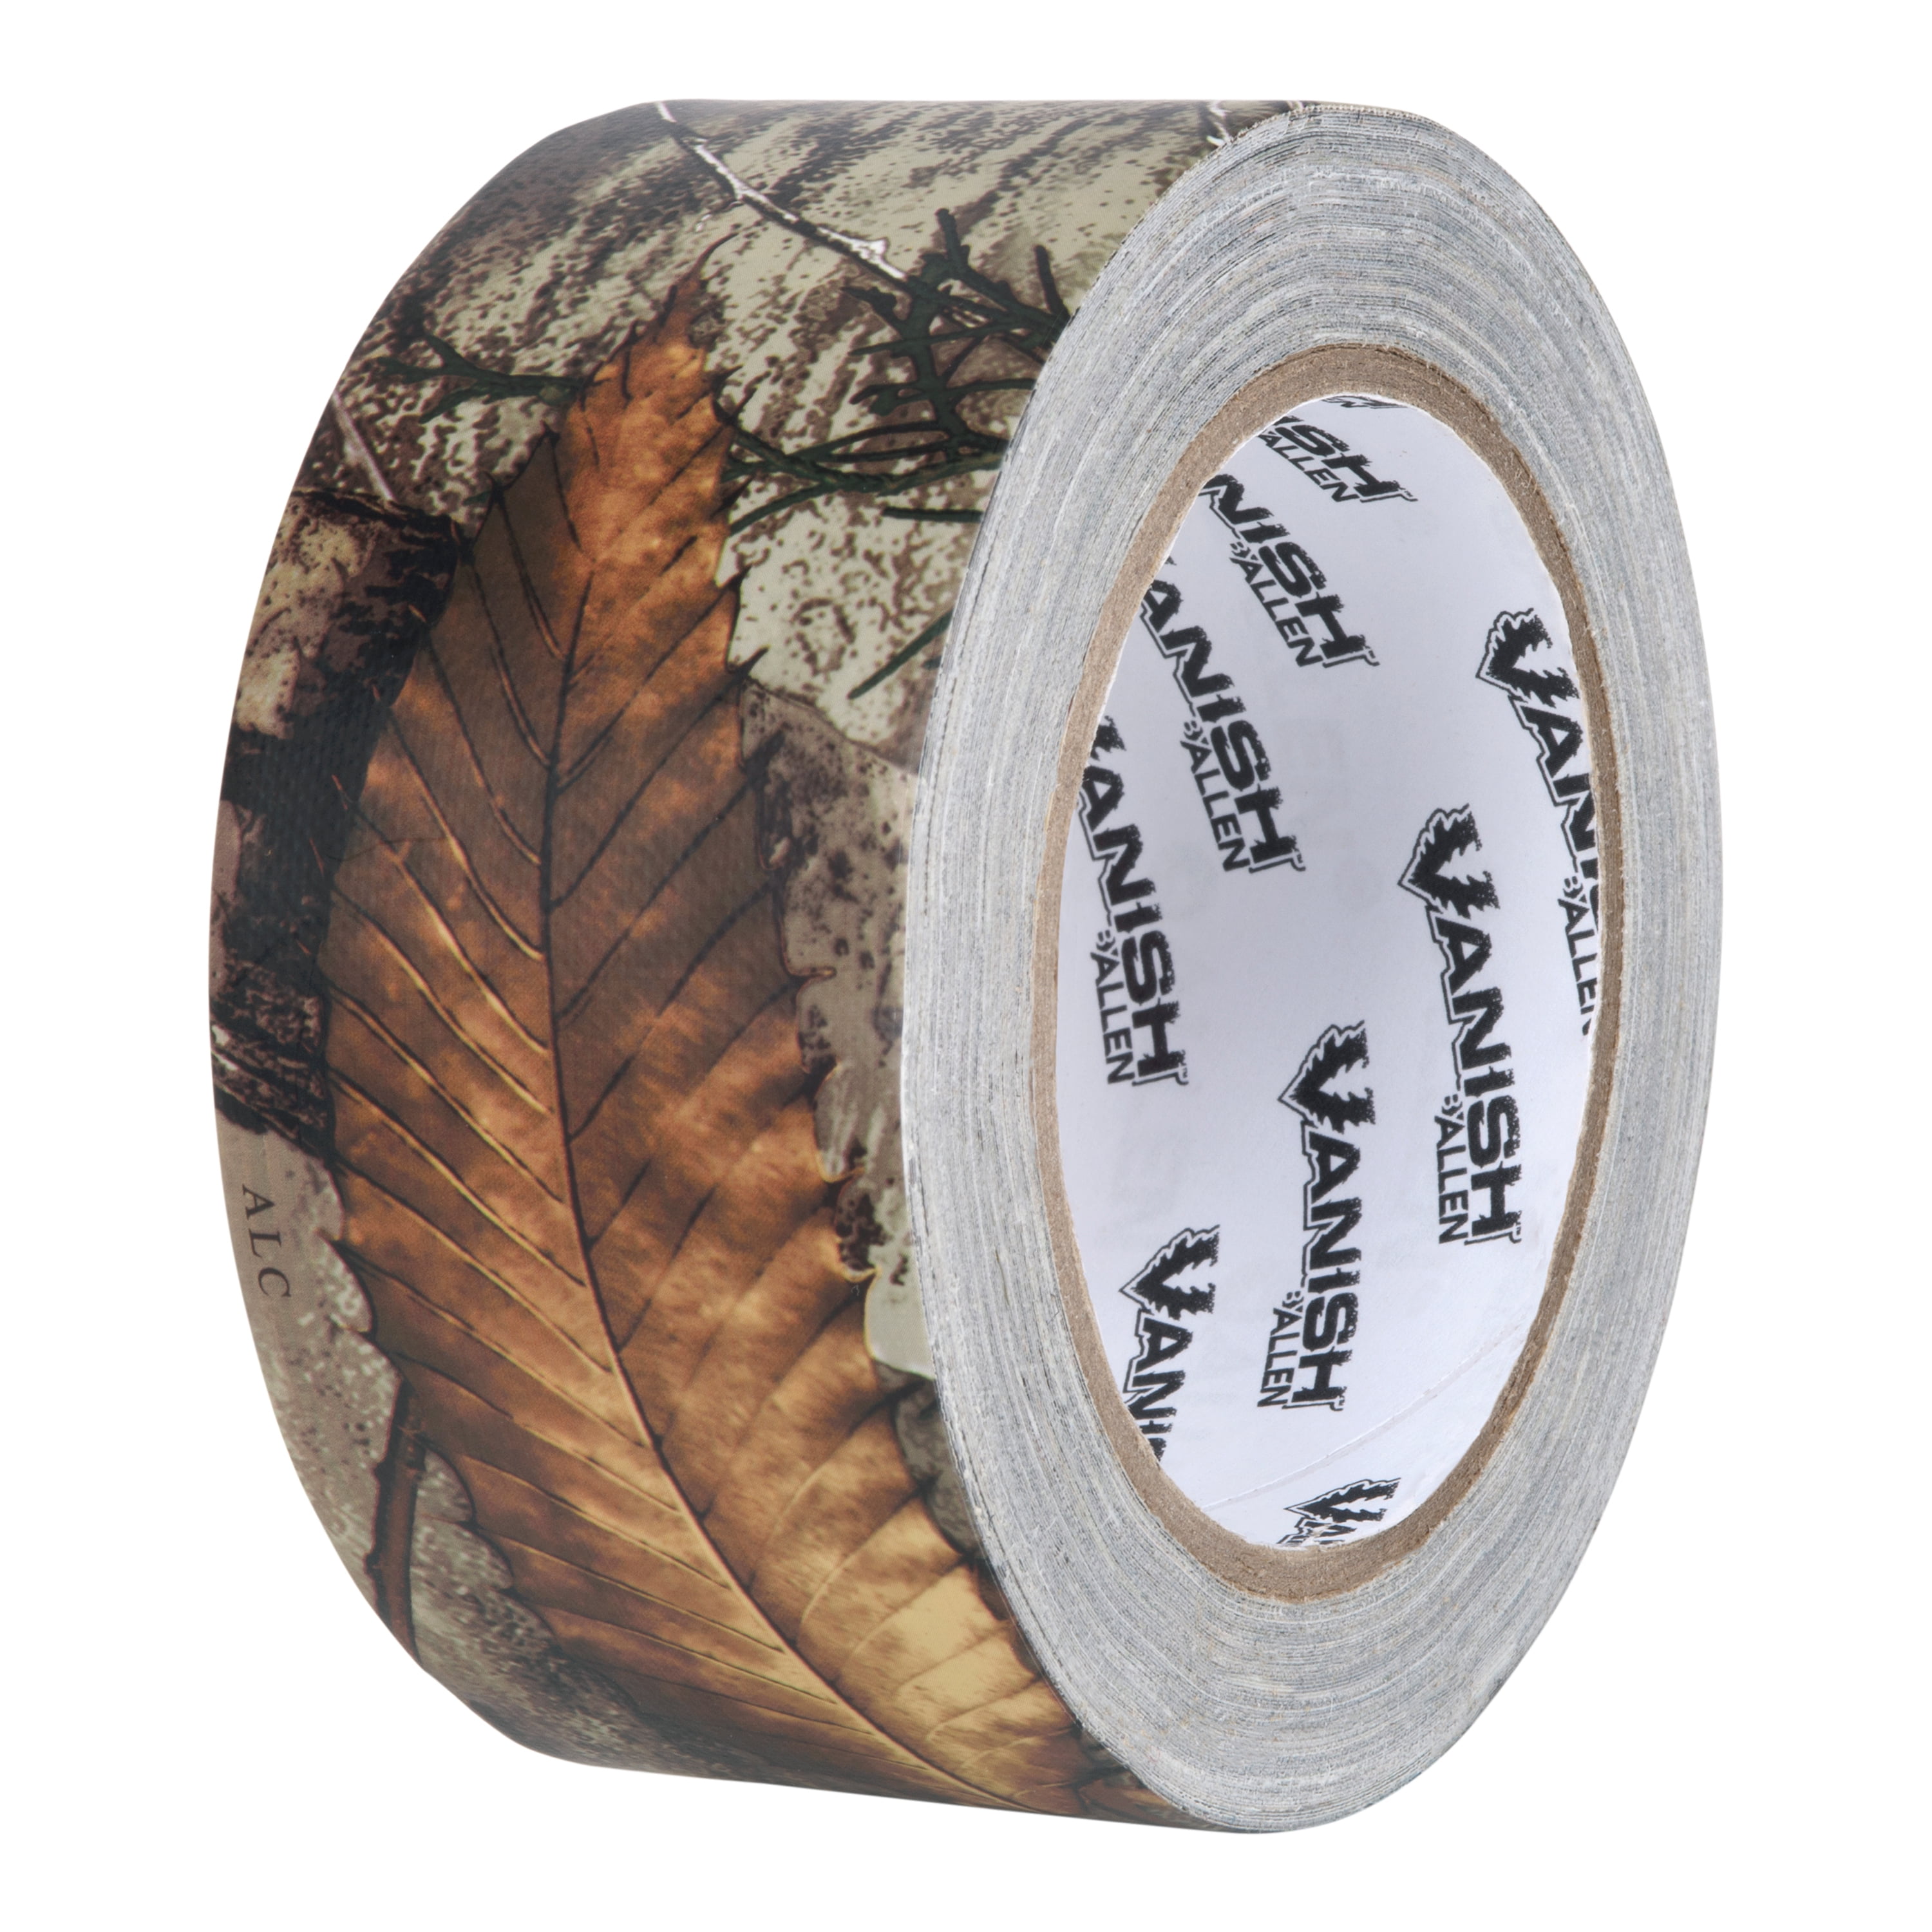 Allen Camouflage Tape Realtree 28 Heavy Duty Camo Duct Tape 2" Hunting 28 